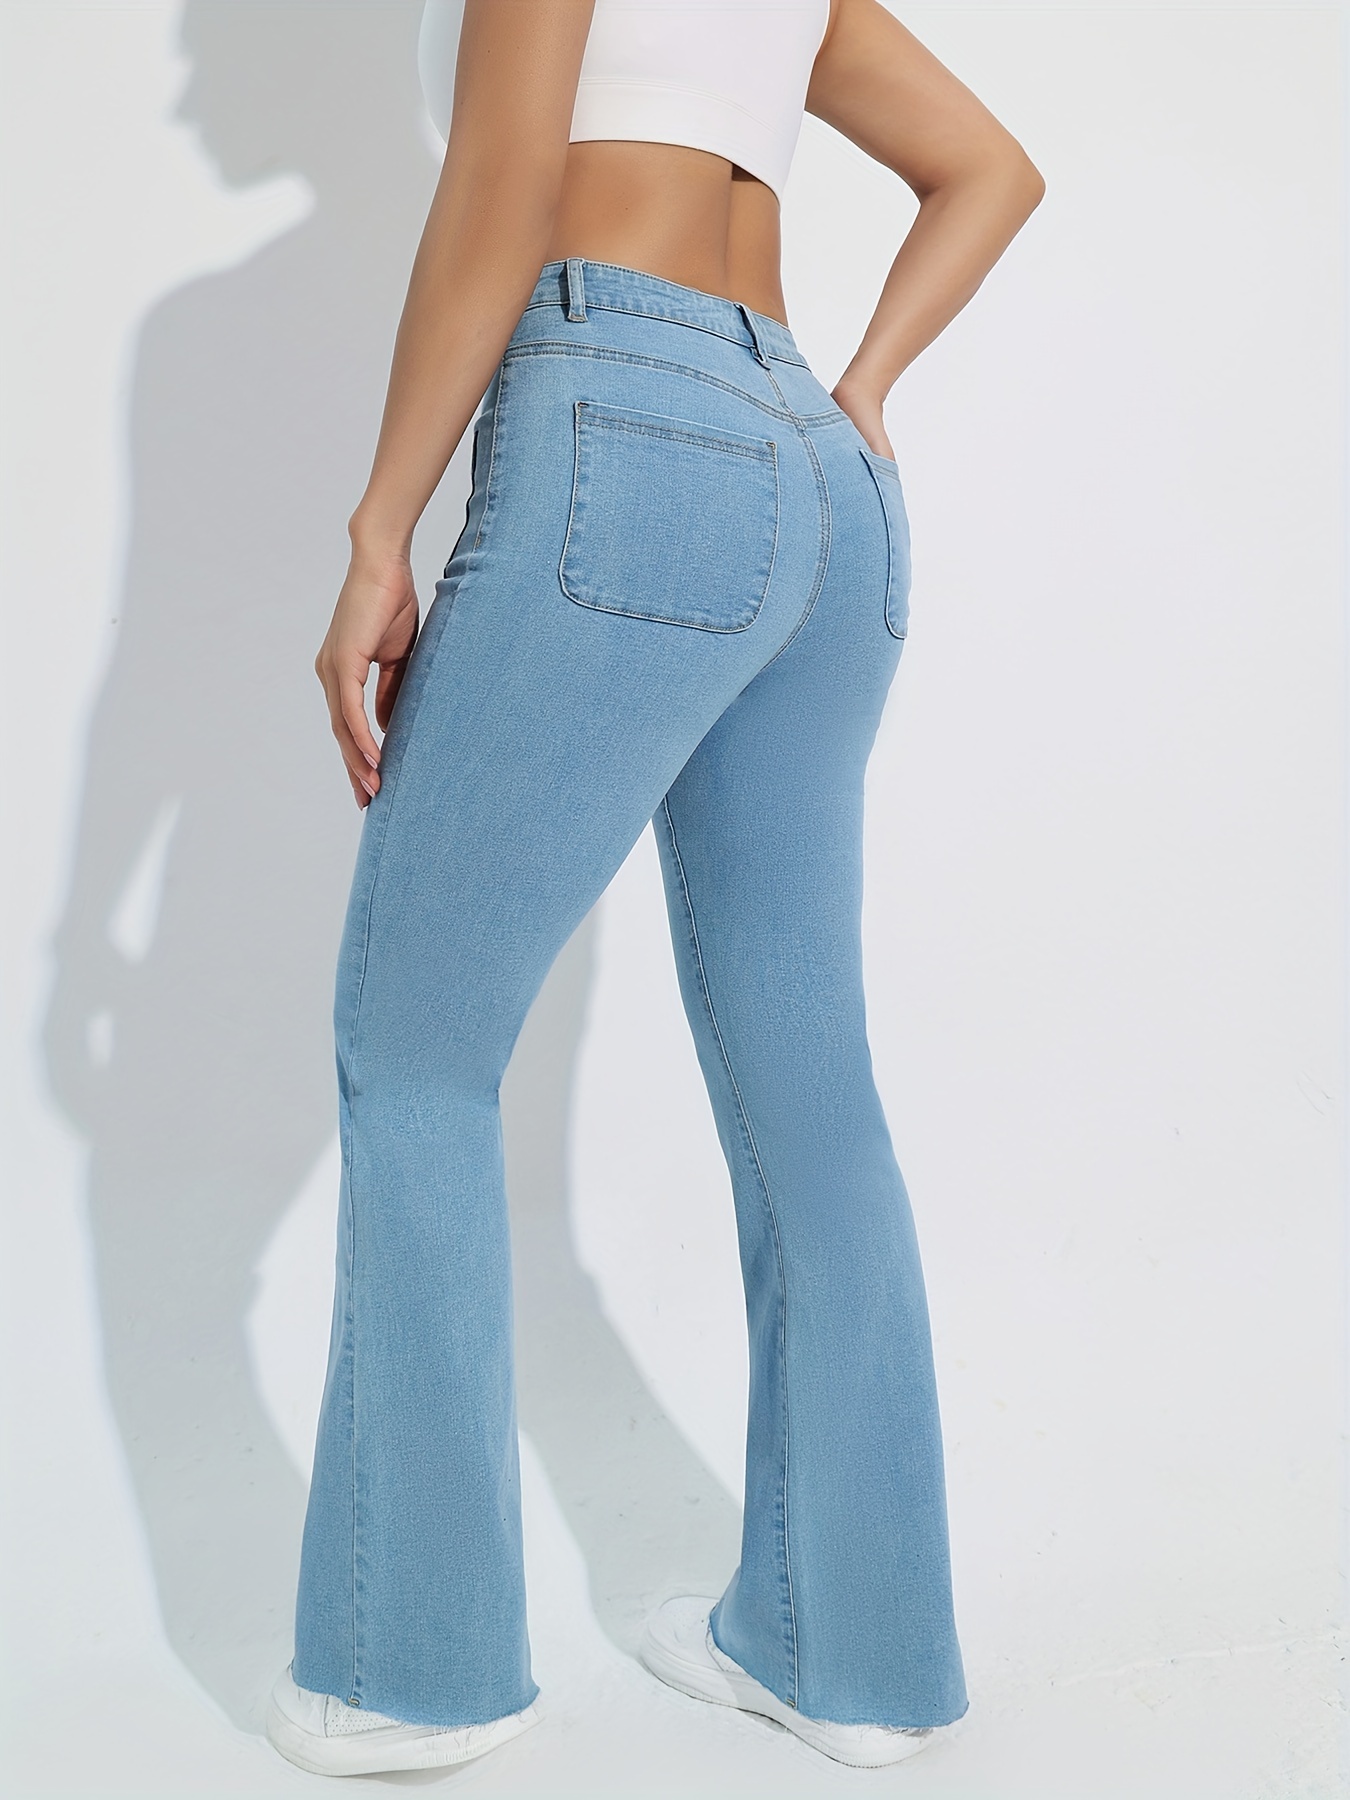 Blue Raw Cut Flare Jeans, High-Stretch Patch Pockets Casual Pintuck Jeans,  Women's Denim Jeans & Clothing